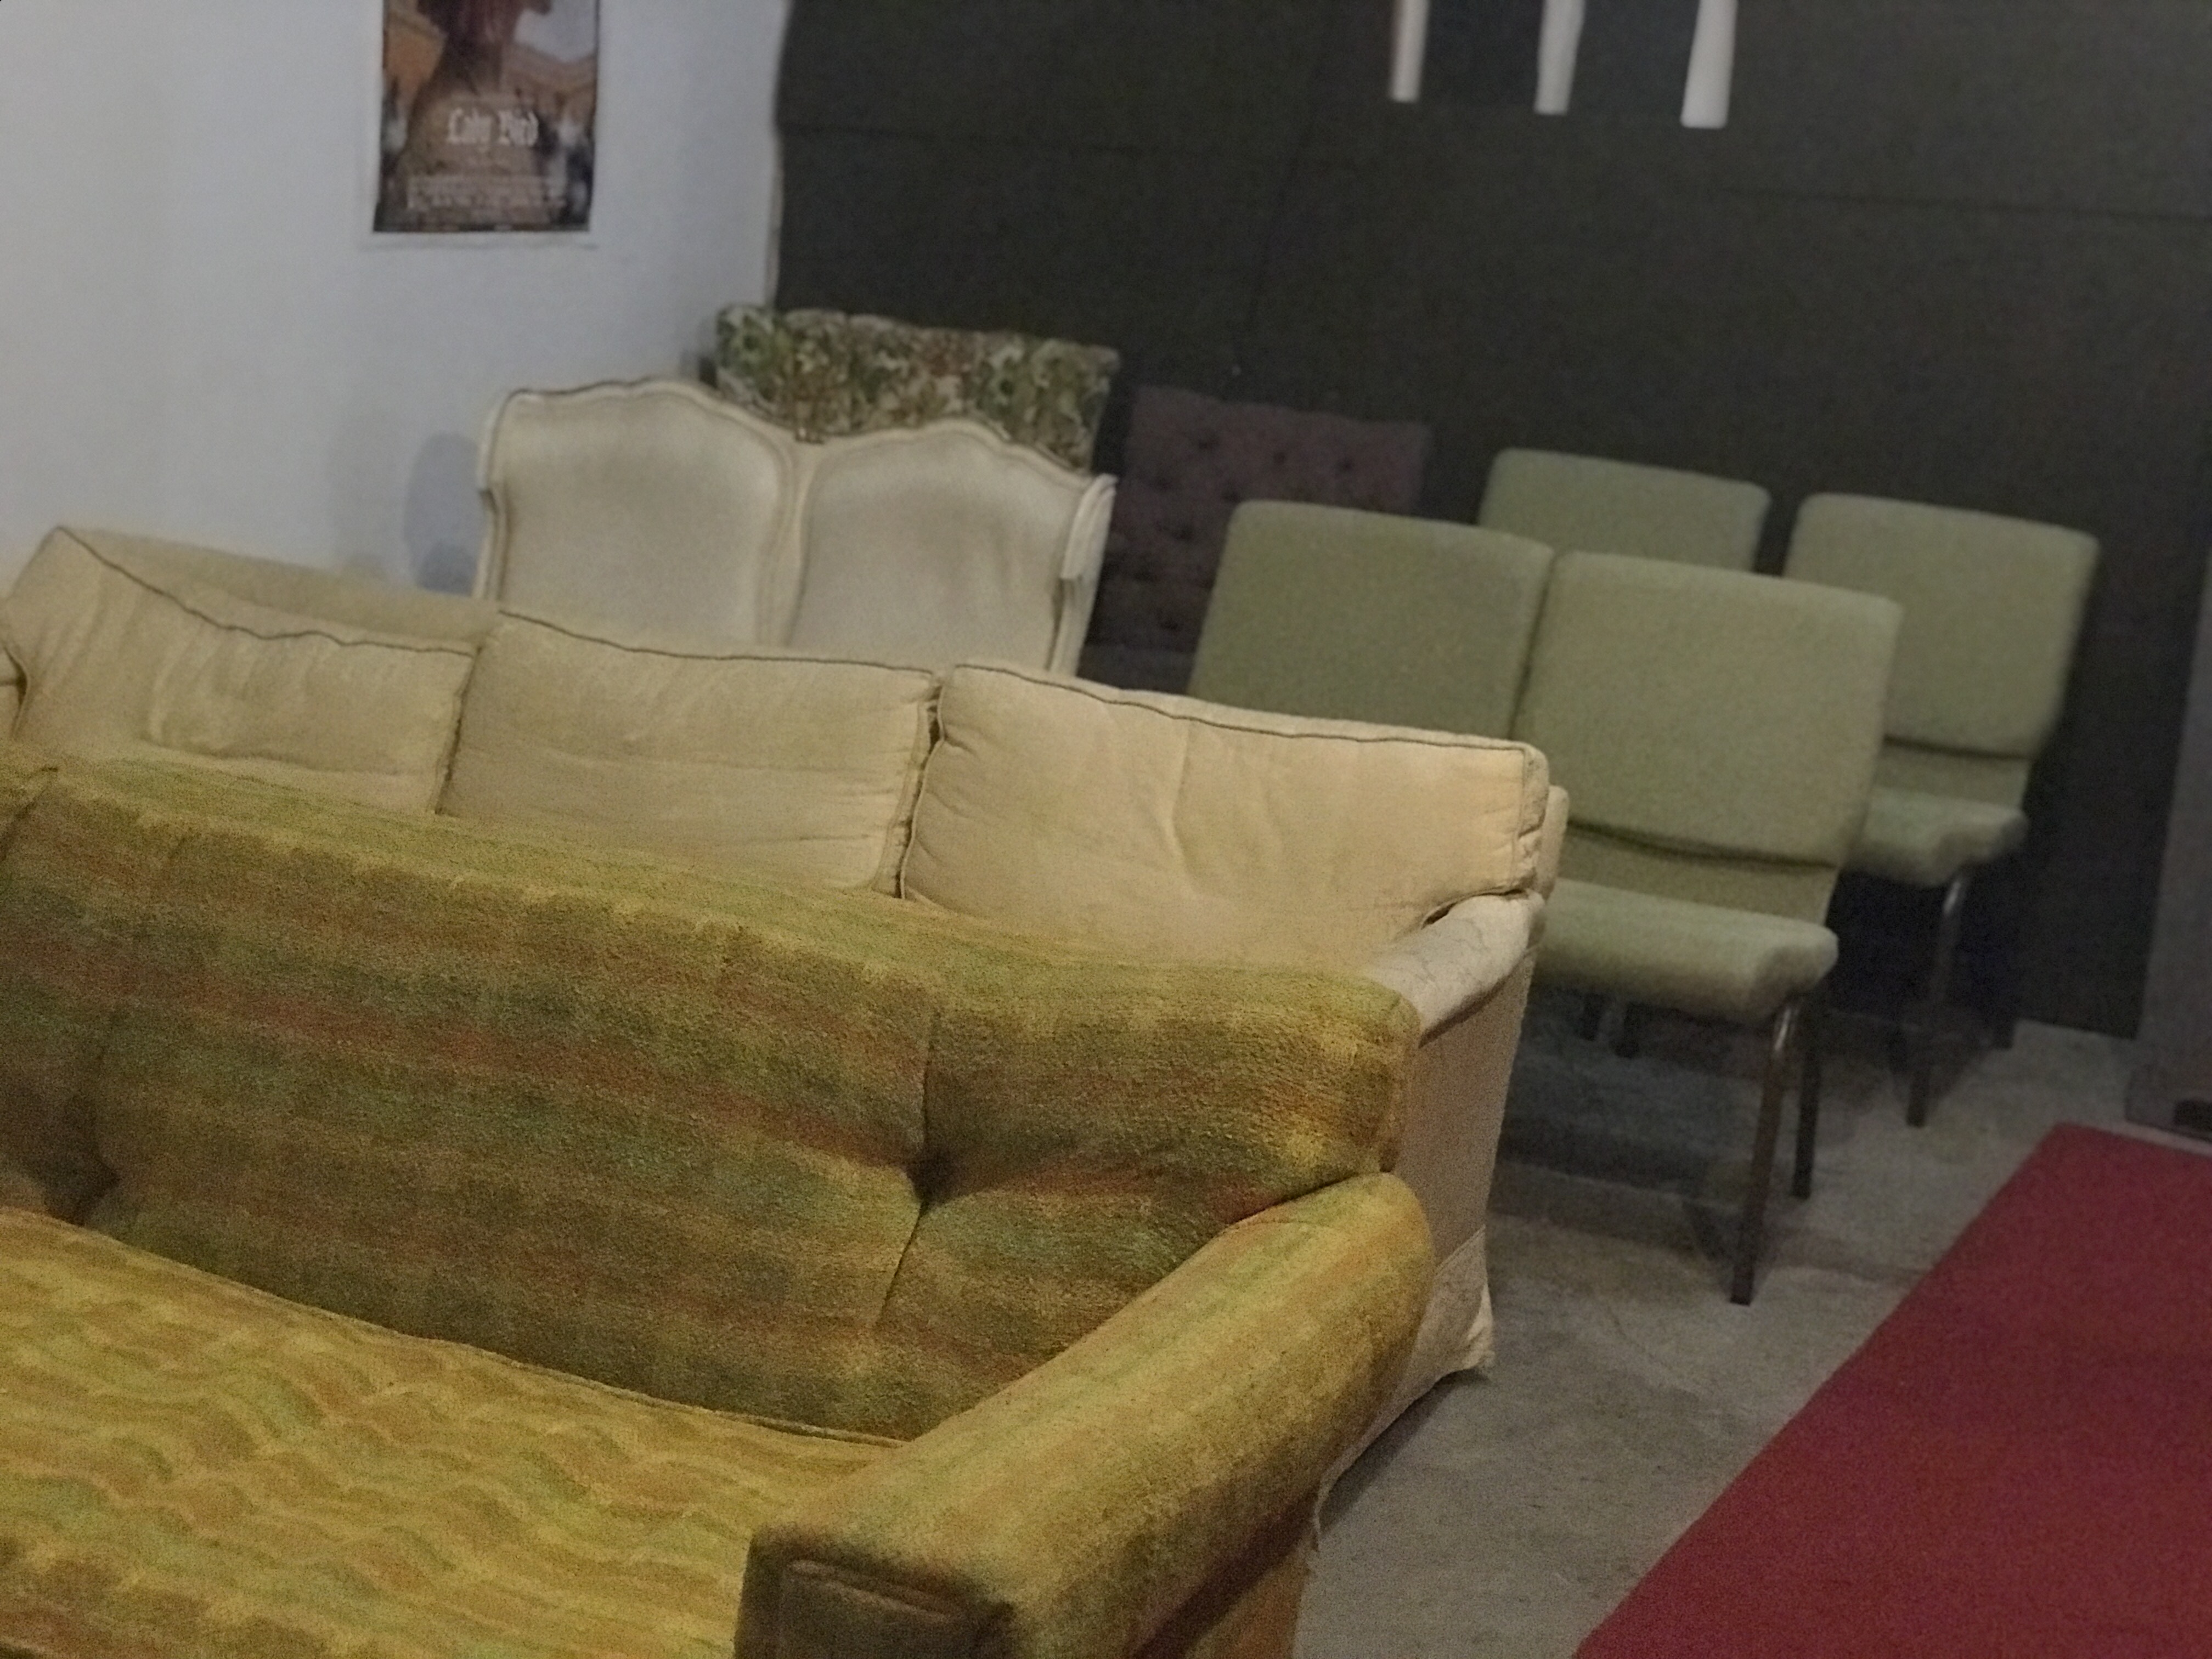 4 rows of seating with two couches, a loveseat, 4 armless chairs, and two armchairs